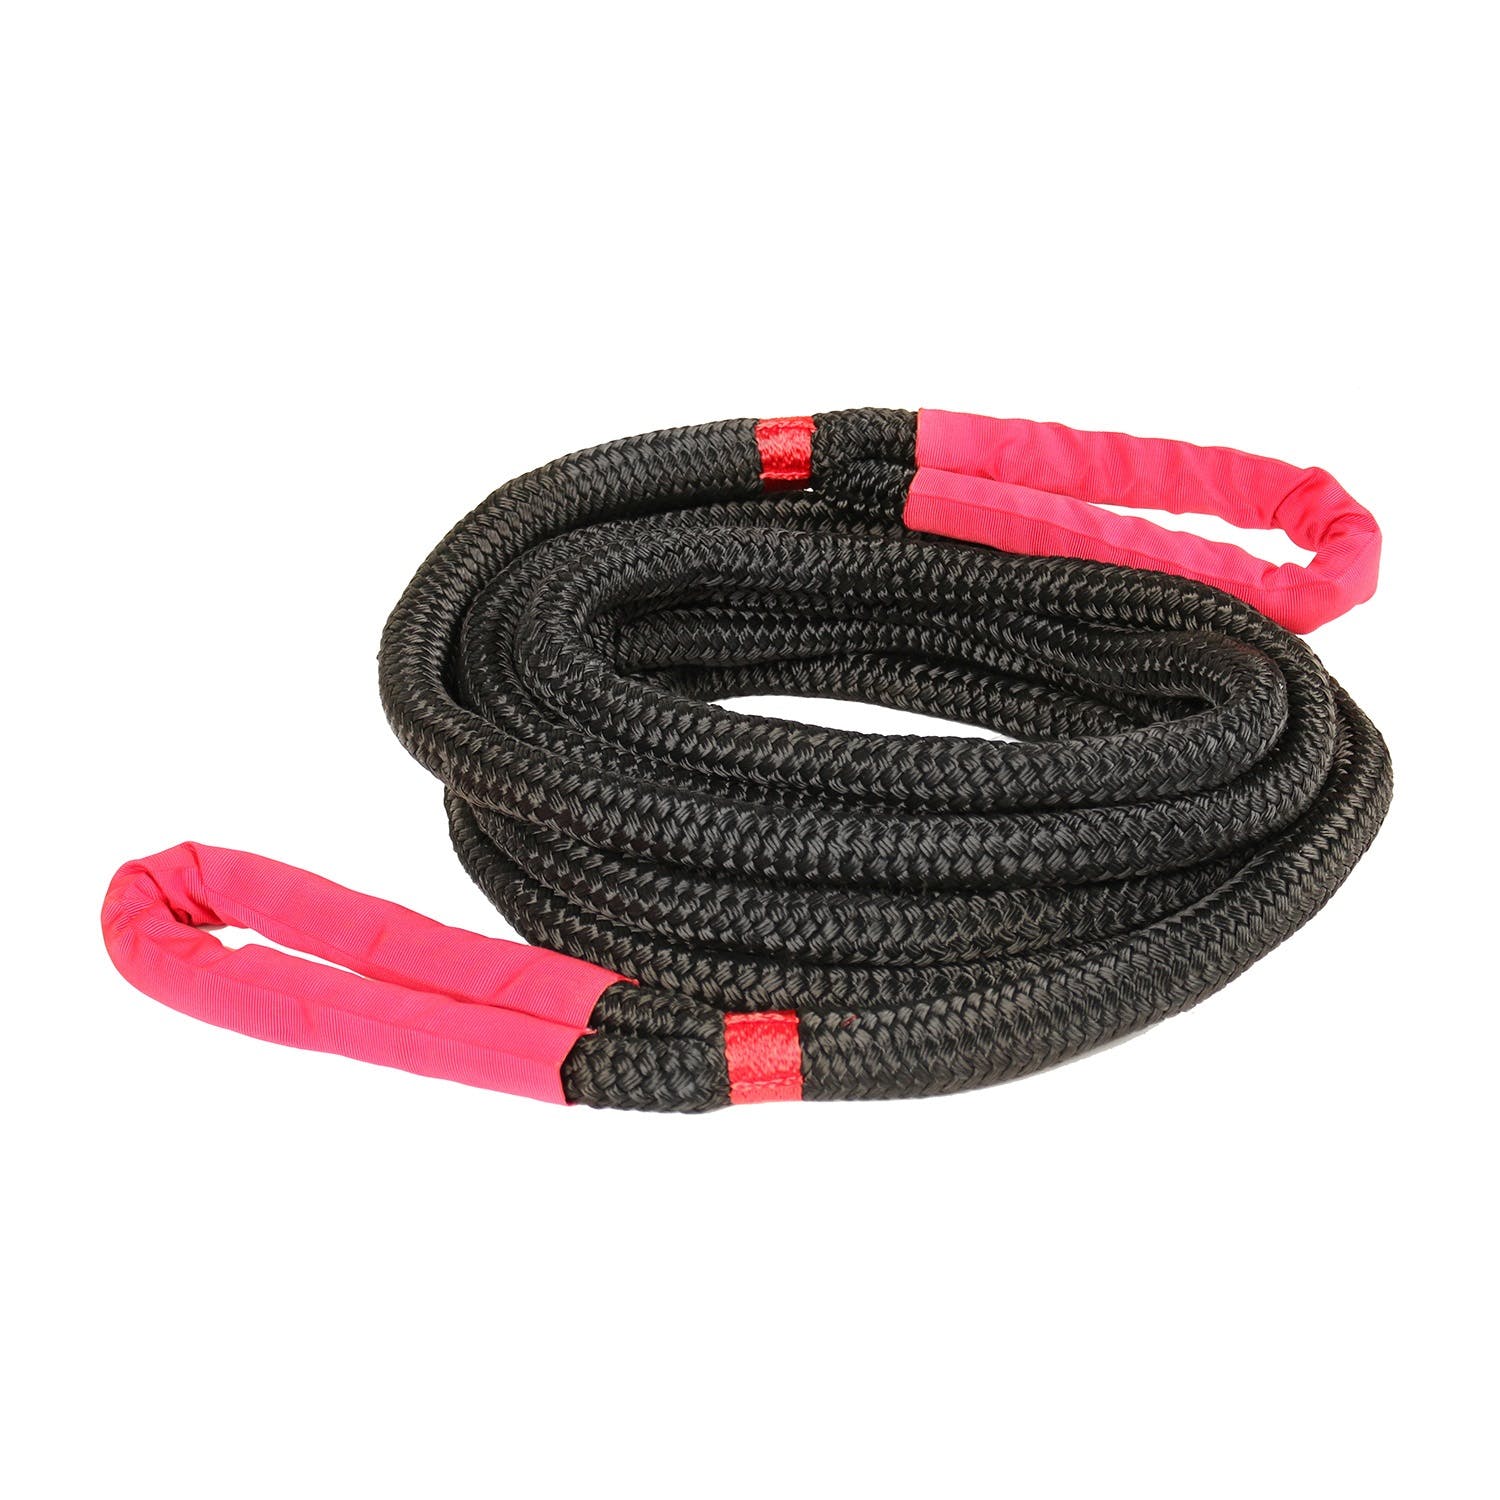 Rugged Ridge 15104.05 Kinetic Recovery Rope; 7/8in. x 30-Feet; 7500 WLL (Working Load Limit)